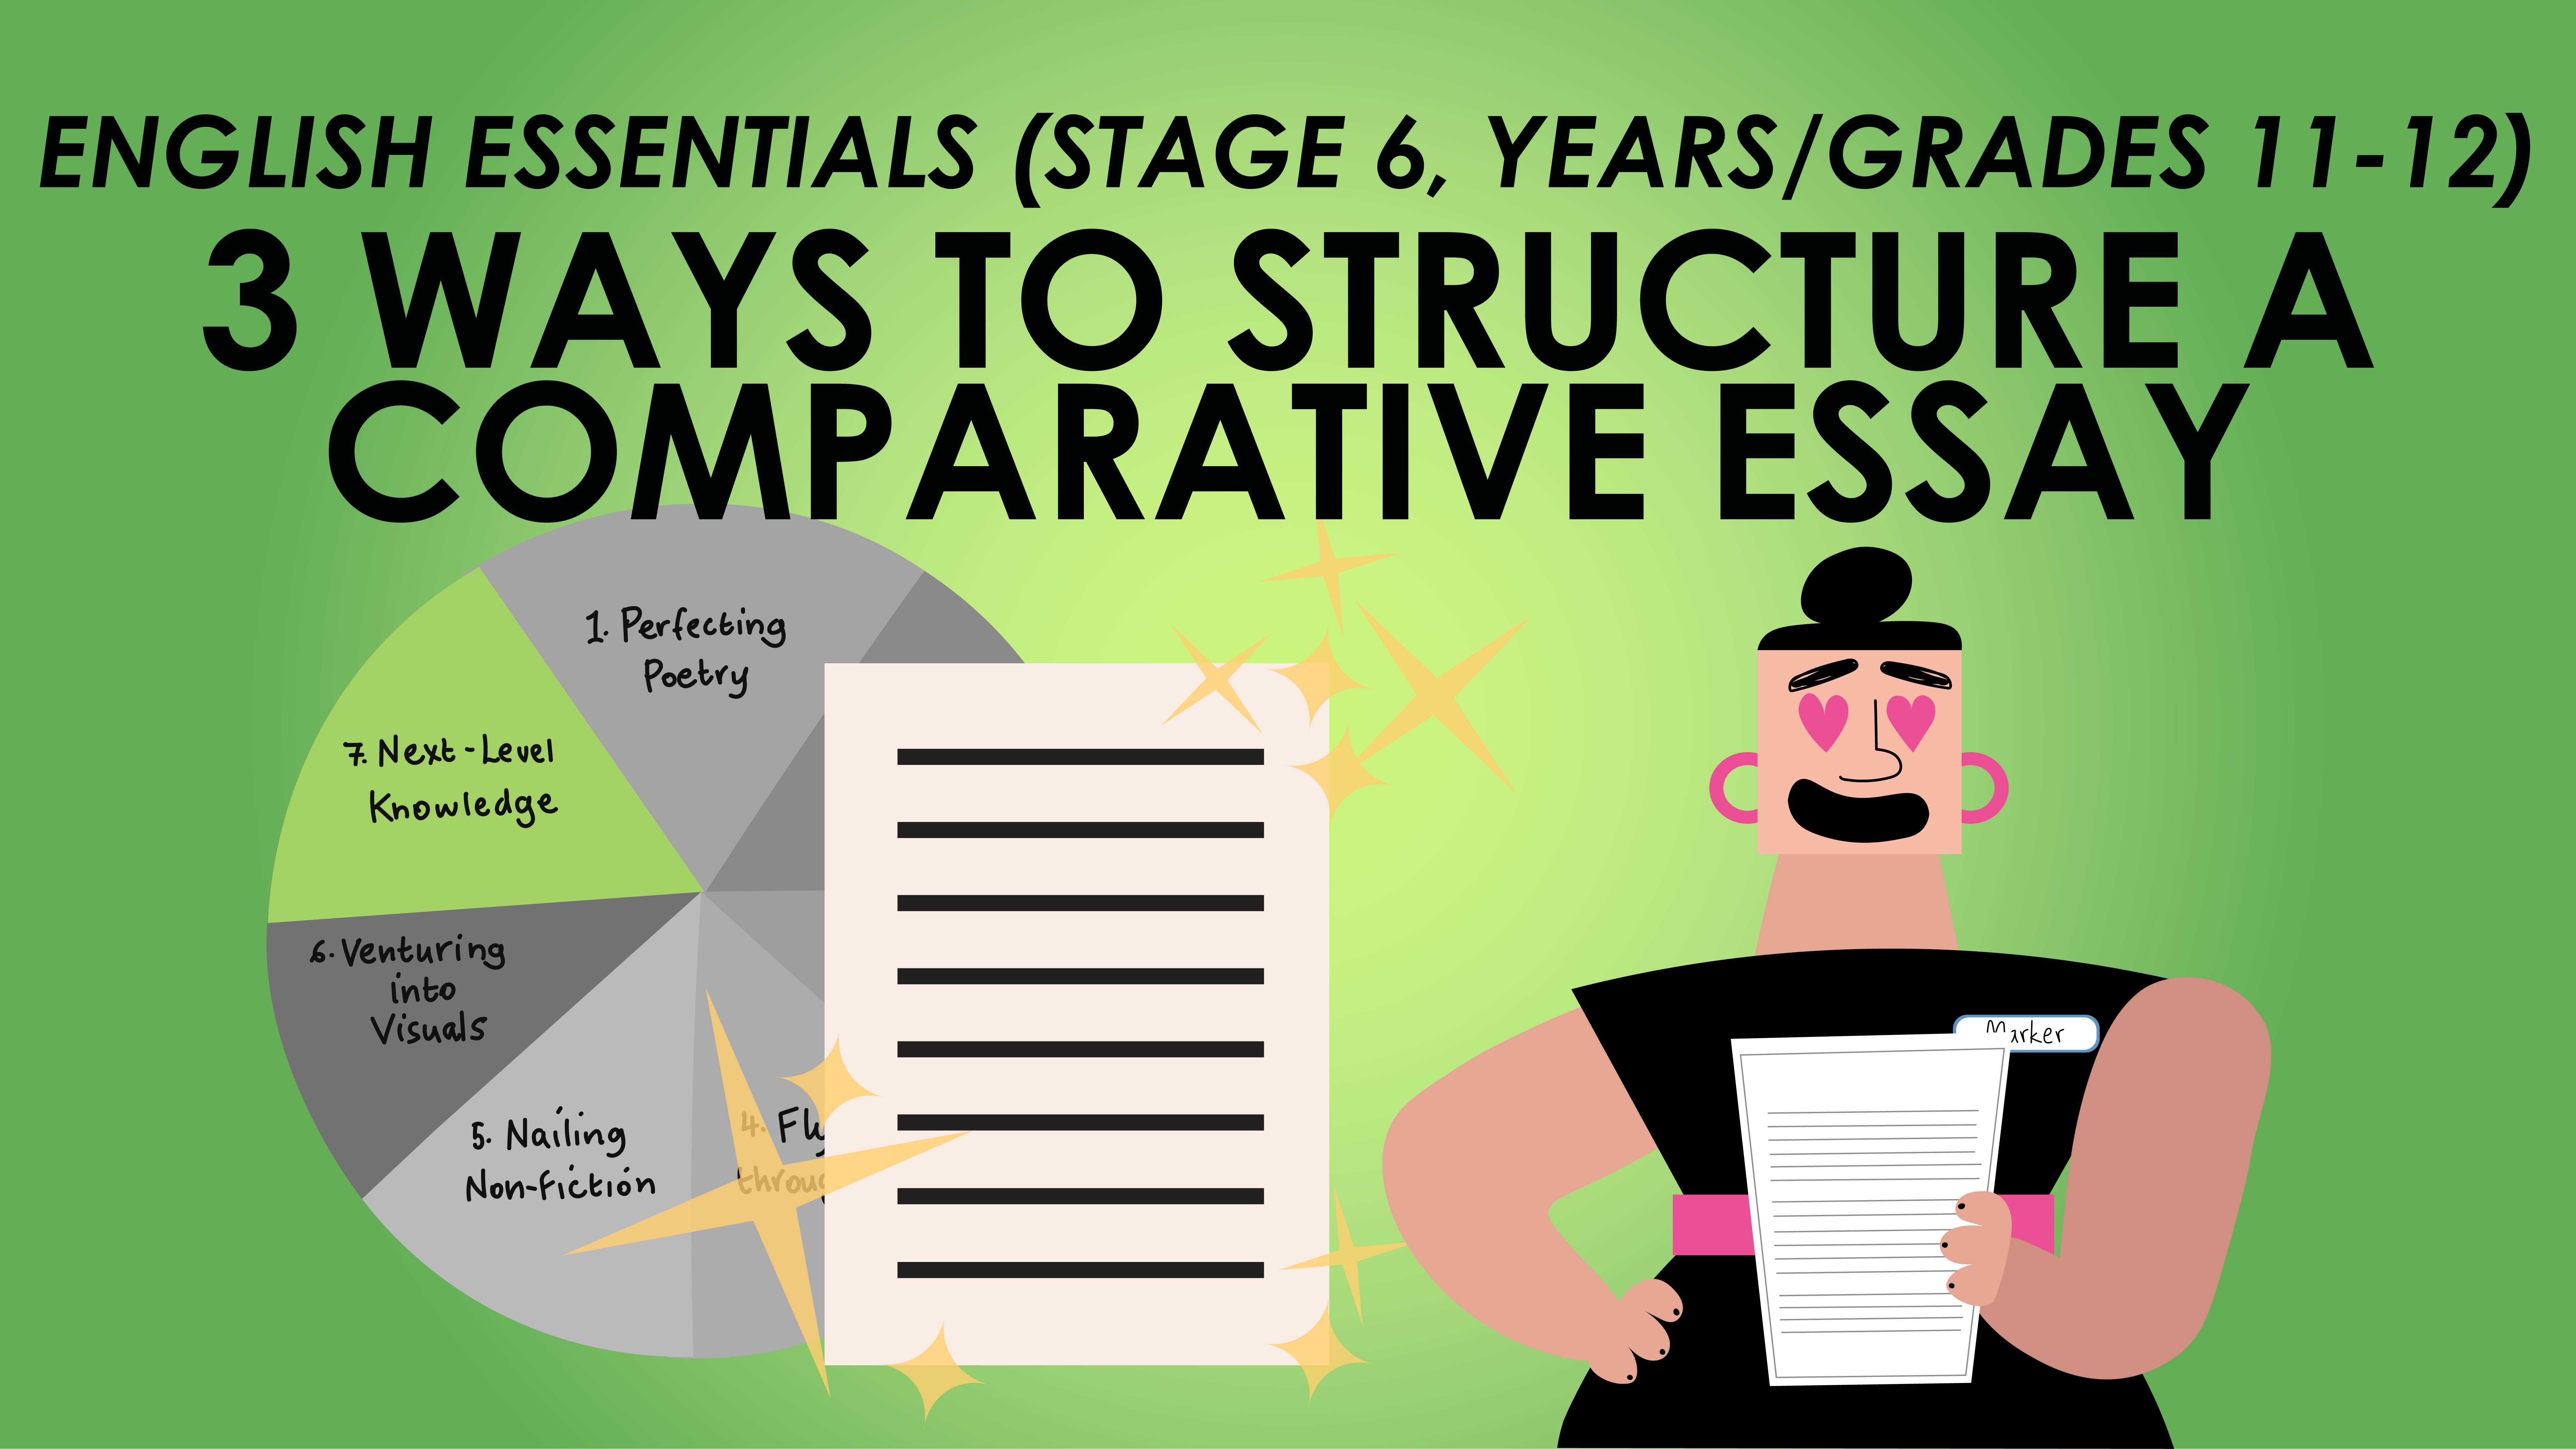 English Essentials - Next Level Knowledge - 3 Ways to Structure a Comparative Essay (Stage 6, Years/Grades 11-12)